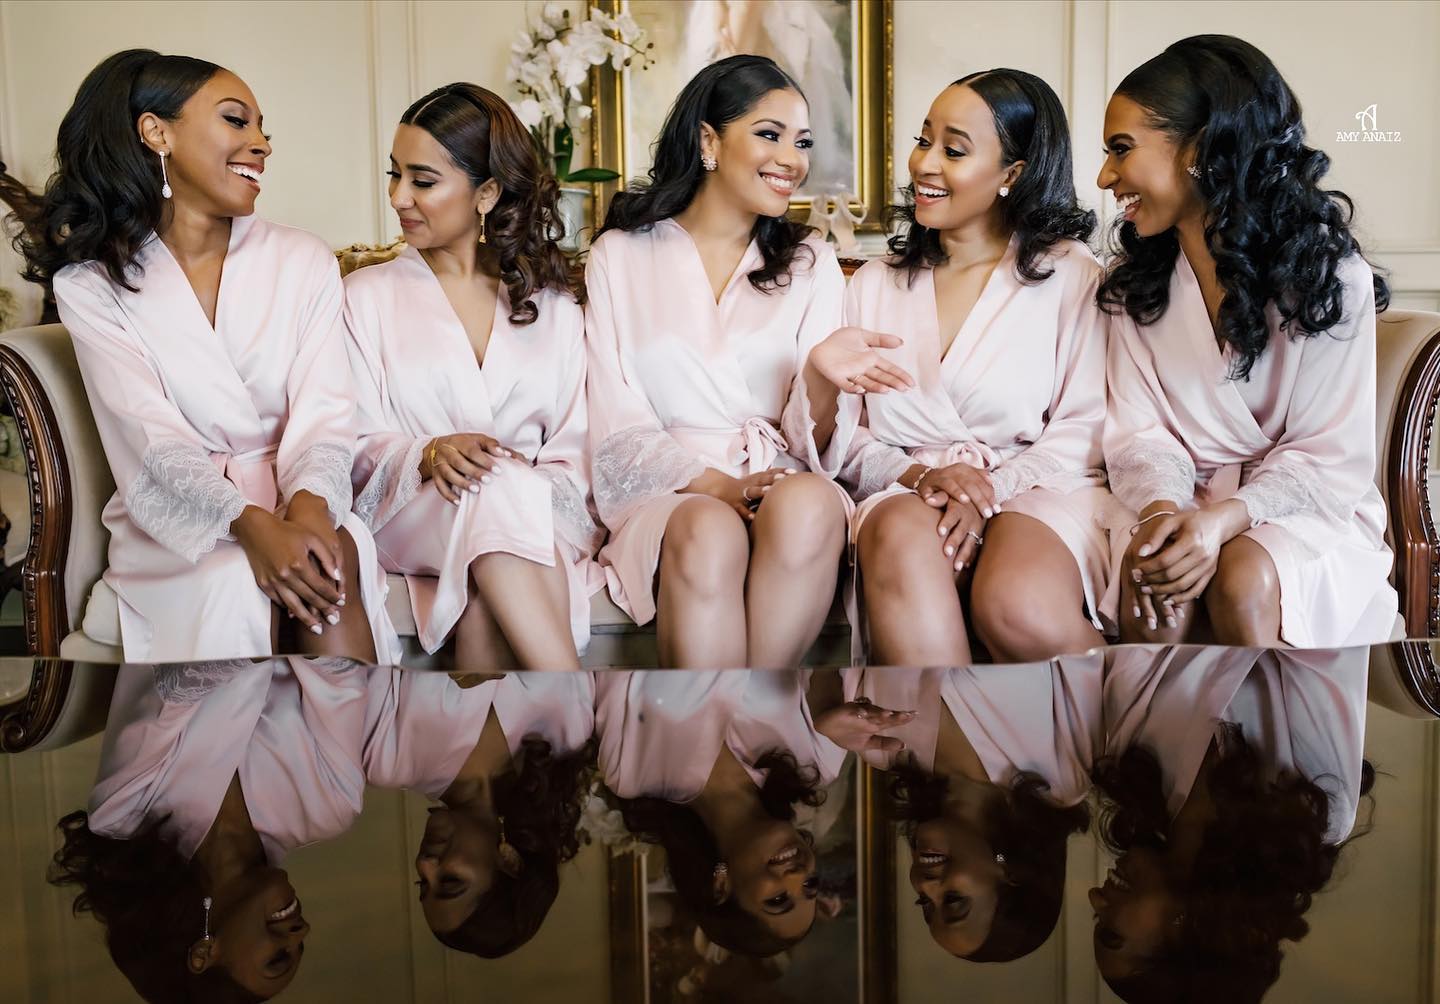 Celebrating the beauty of this week with @bellethemagazine. Catch the recap of our Live conversation where we chatted all about growing up Latina in the US.  Can’t wait to tune into @joserolonevents @alesacasa @prestonrbailey @dulcedreamsevents @francescamiranda_ @bloompr.events @cortiellaphotography the rest of this week ?